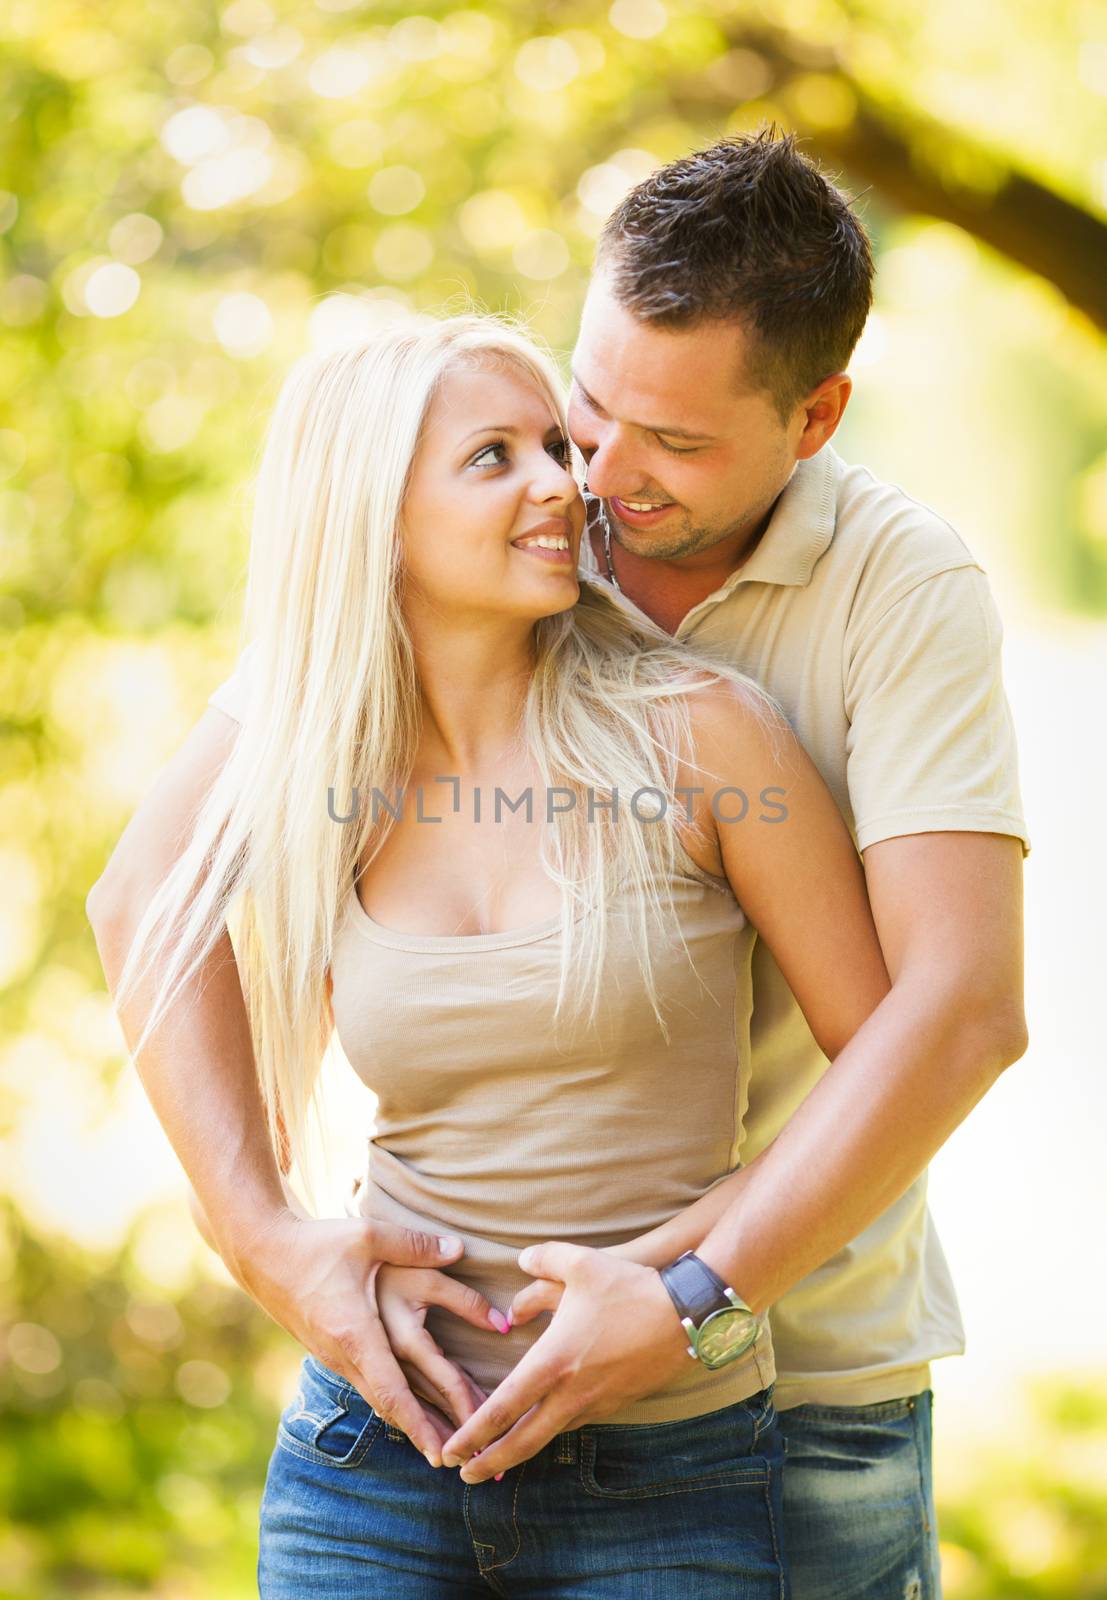 Beautiful young romantic couple in the park and making heart shape with hands.